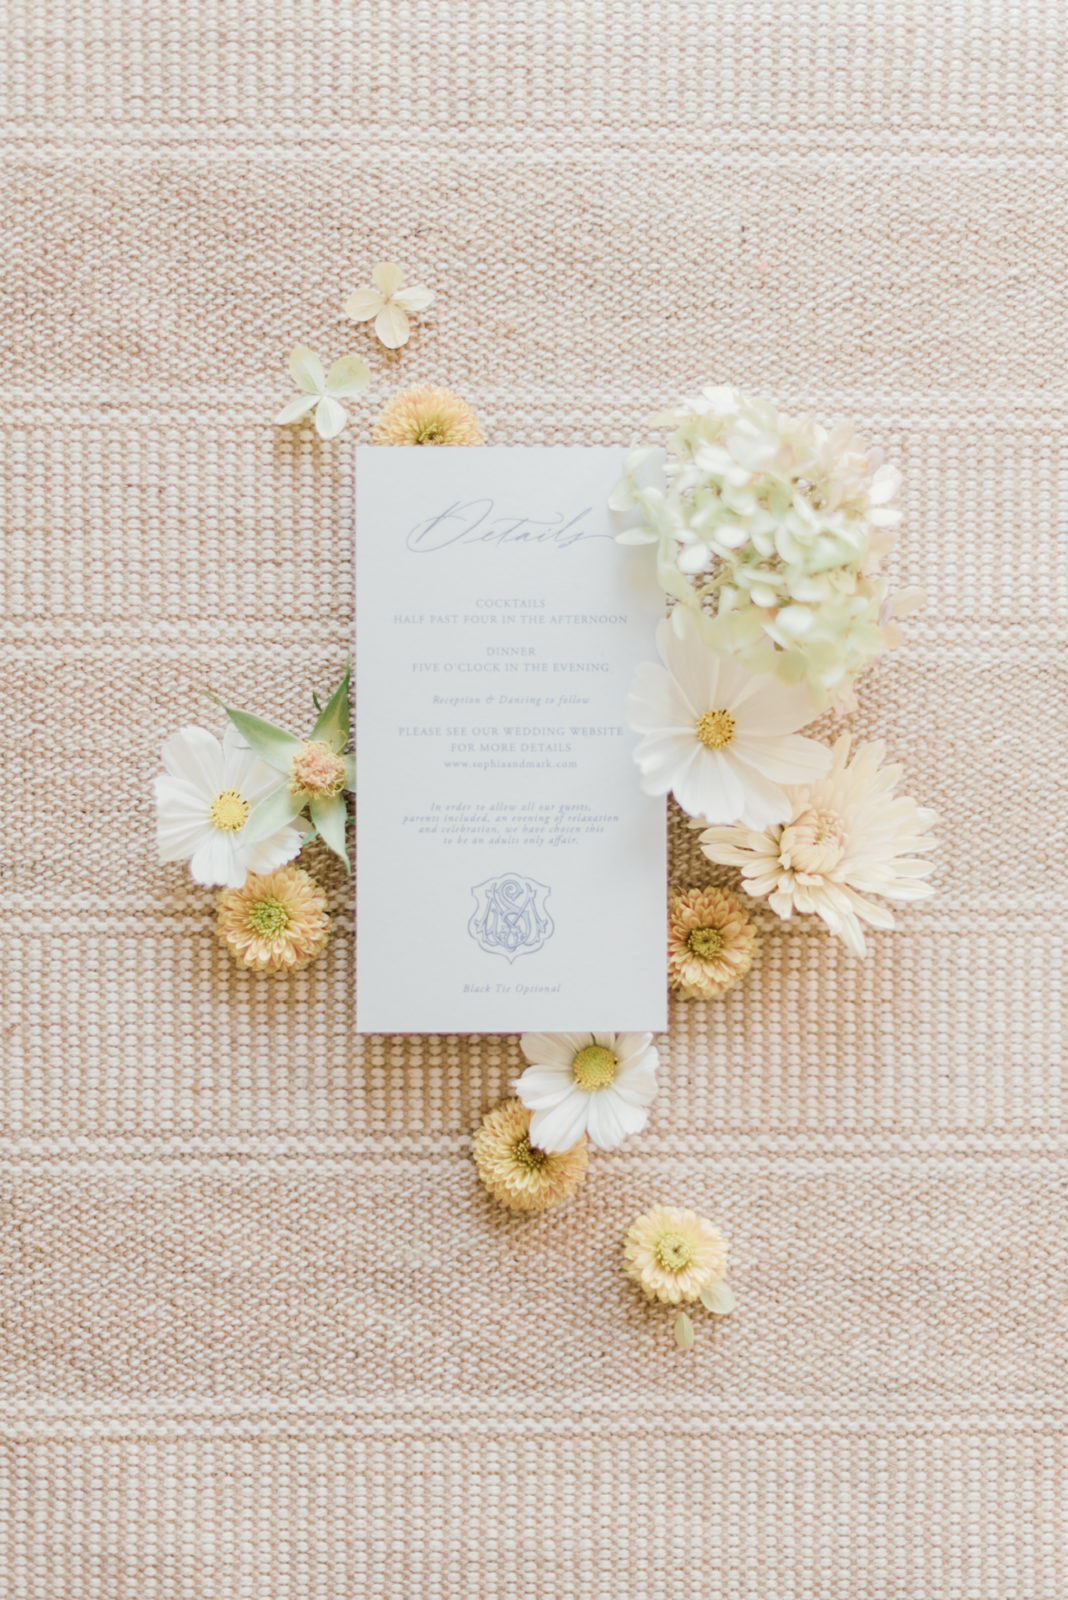 Pantone Colours of The Year In this Gorgeous Portugal-Inspired Wedding Editorial Featured by Brontë Bride, white cosmos, yellow flowers